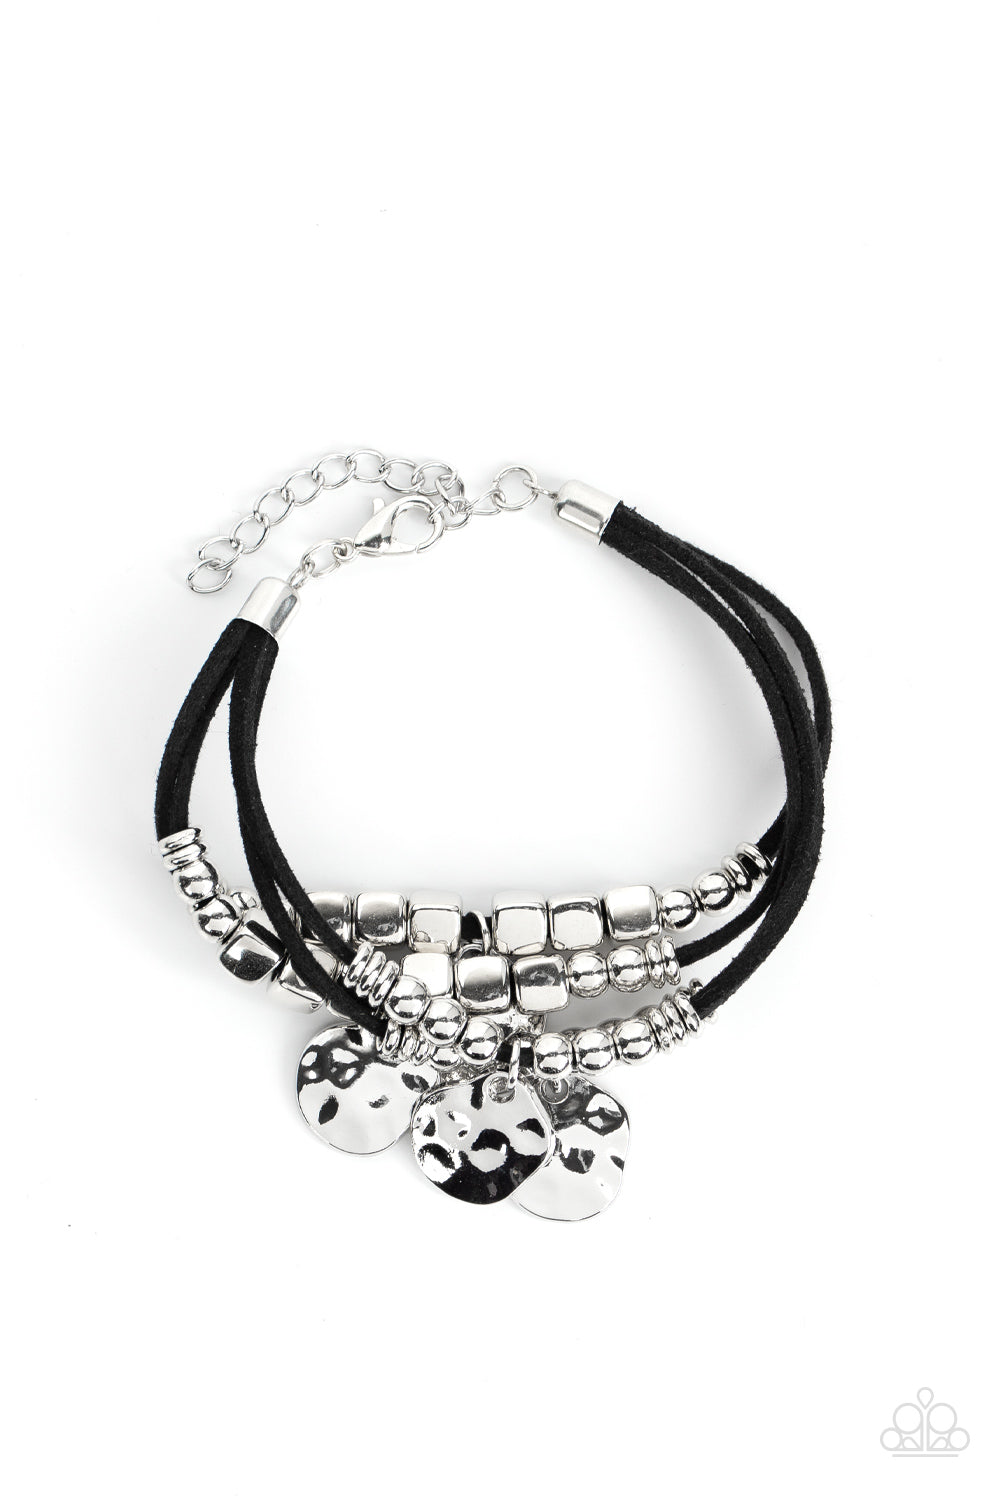 Token Trek - Black and Silver Bracelet  - Paparazzi Jewelry - Bejeweled Accessories By Kristie - Hammered silver discs swing from layers of black suede that are adorned with silver discs, beads, and cubes, for noisemaking shimmer around the wrist. Features an adjustable clasp closure.